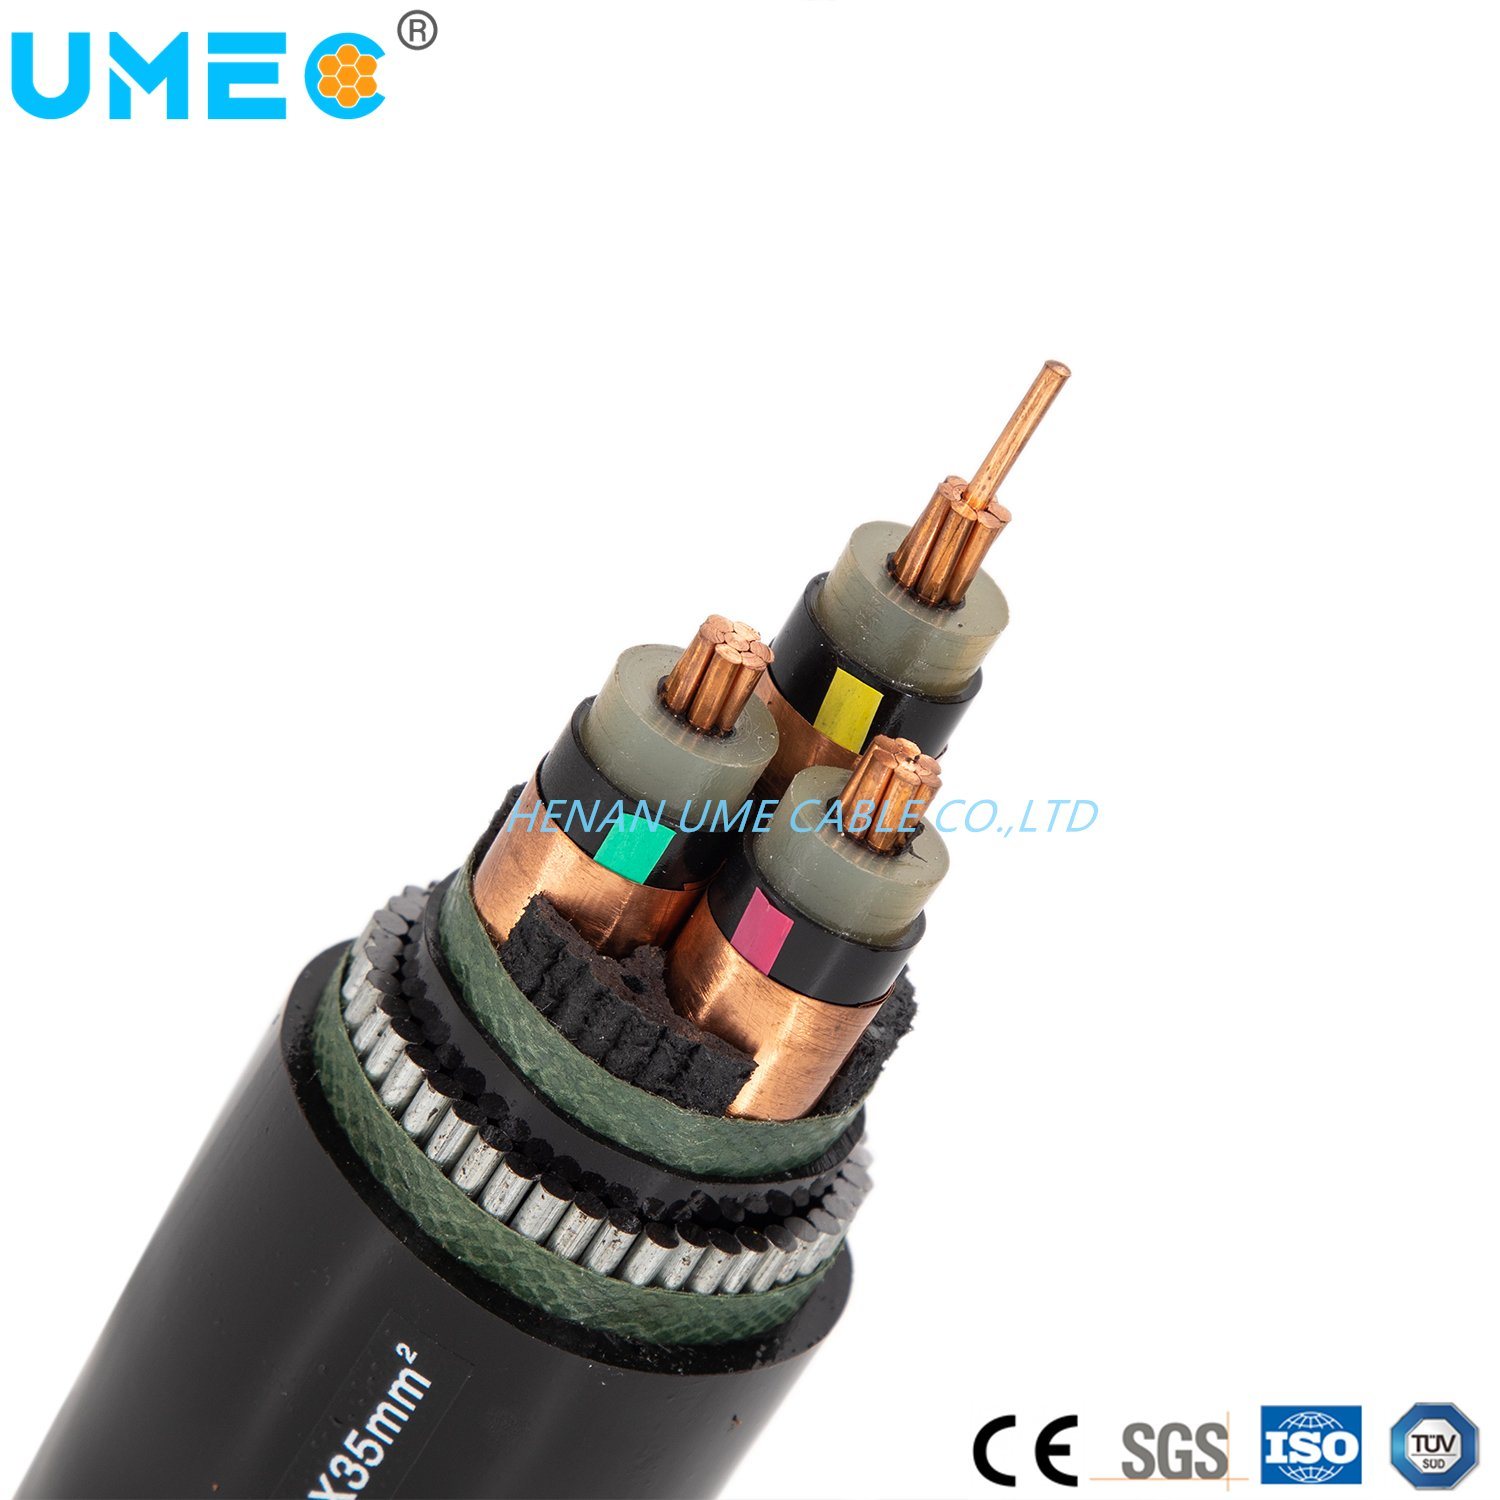 Frequency Converter Cable Connection Cable